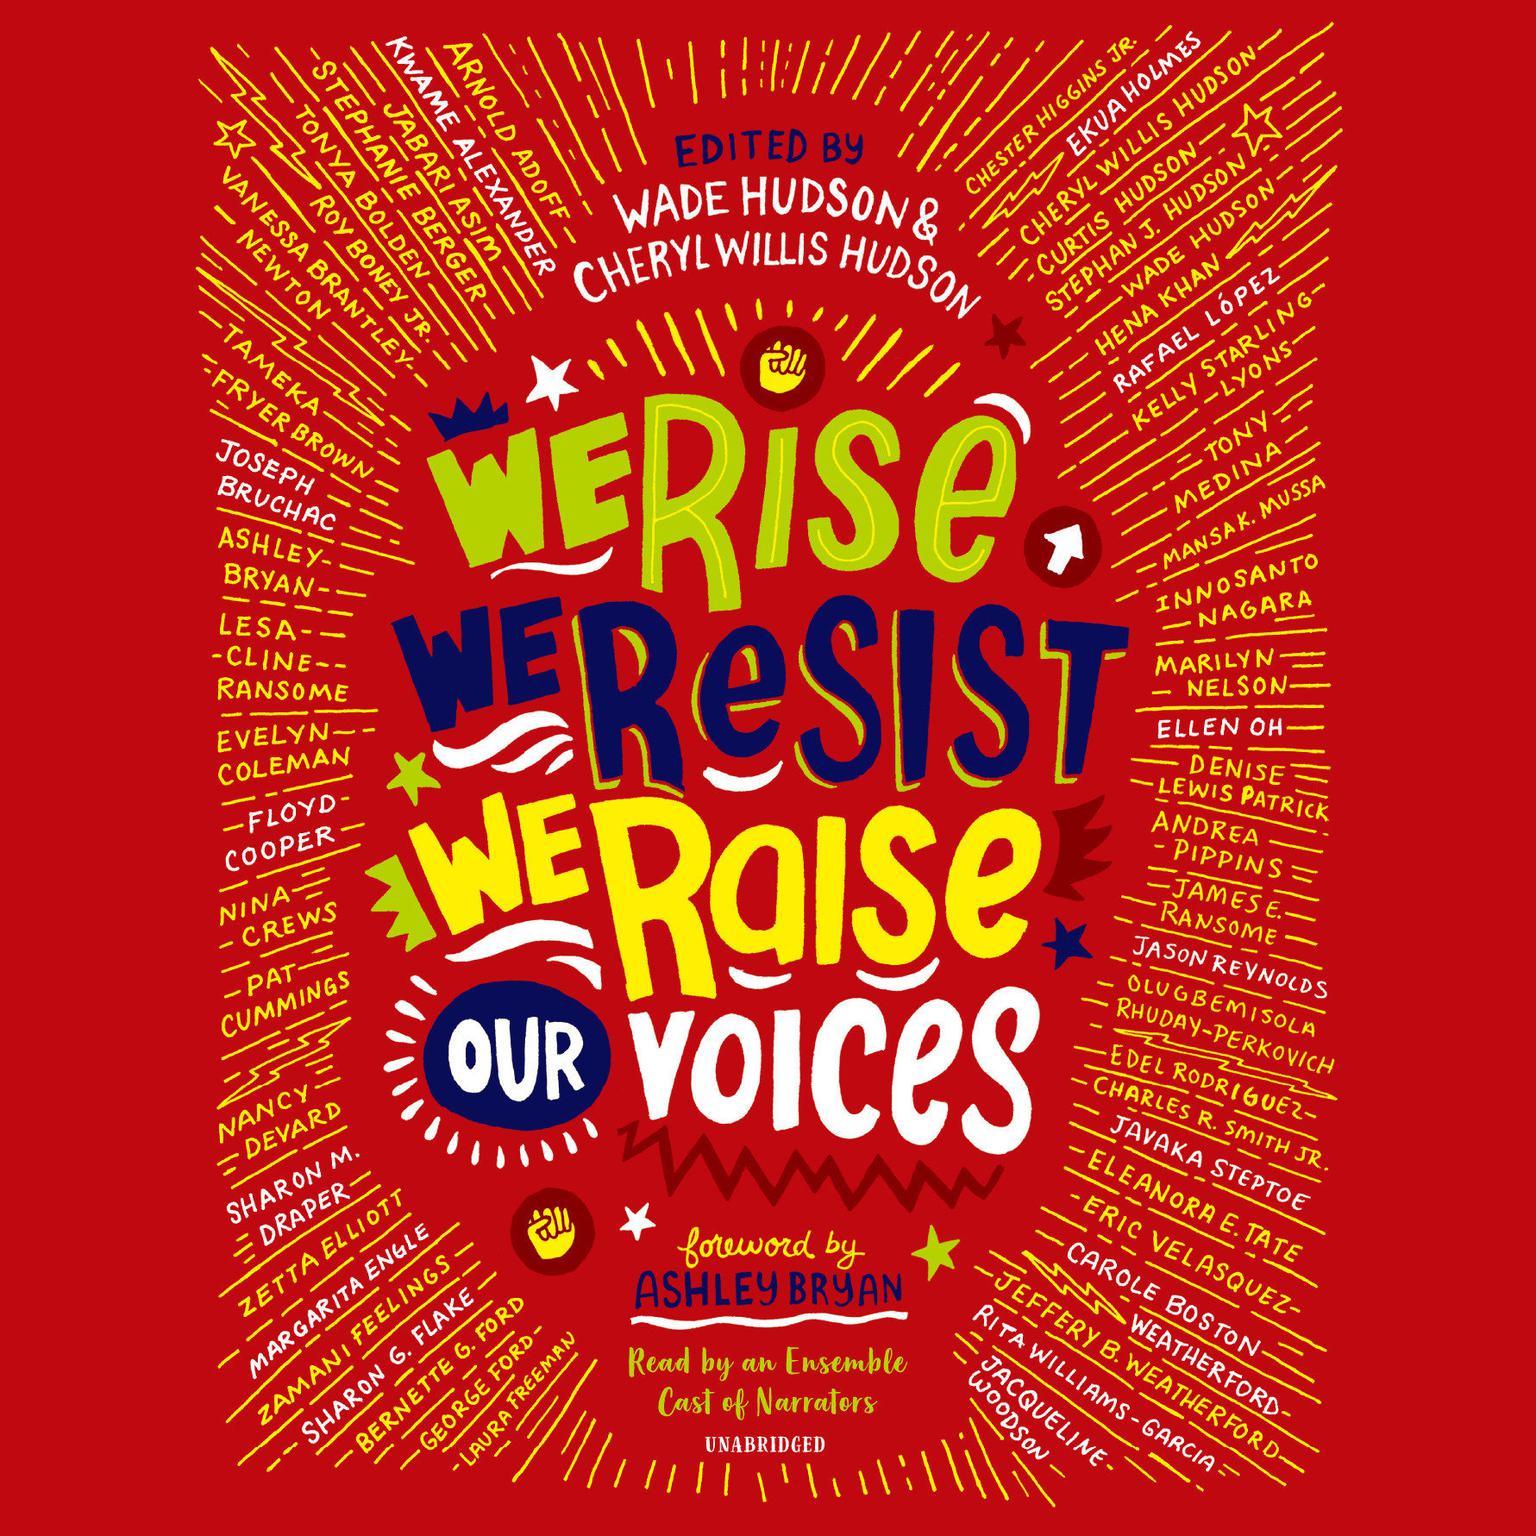 We Rise, We Resist, We Raise Our Voices Audiobook, by Cheryl Willis Hudson